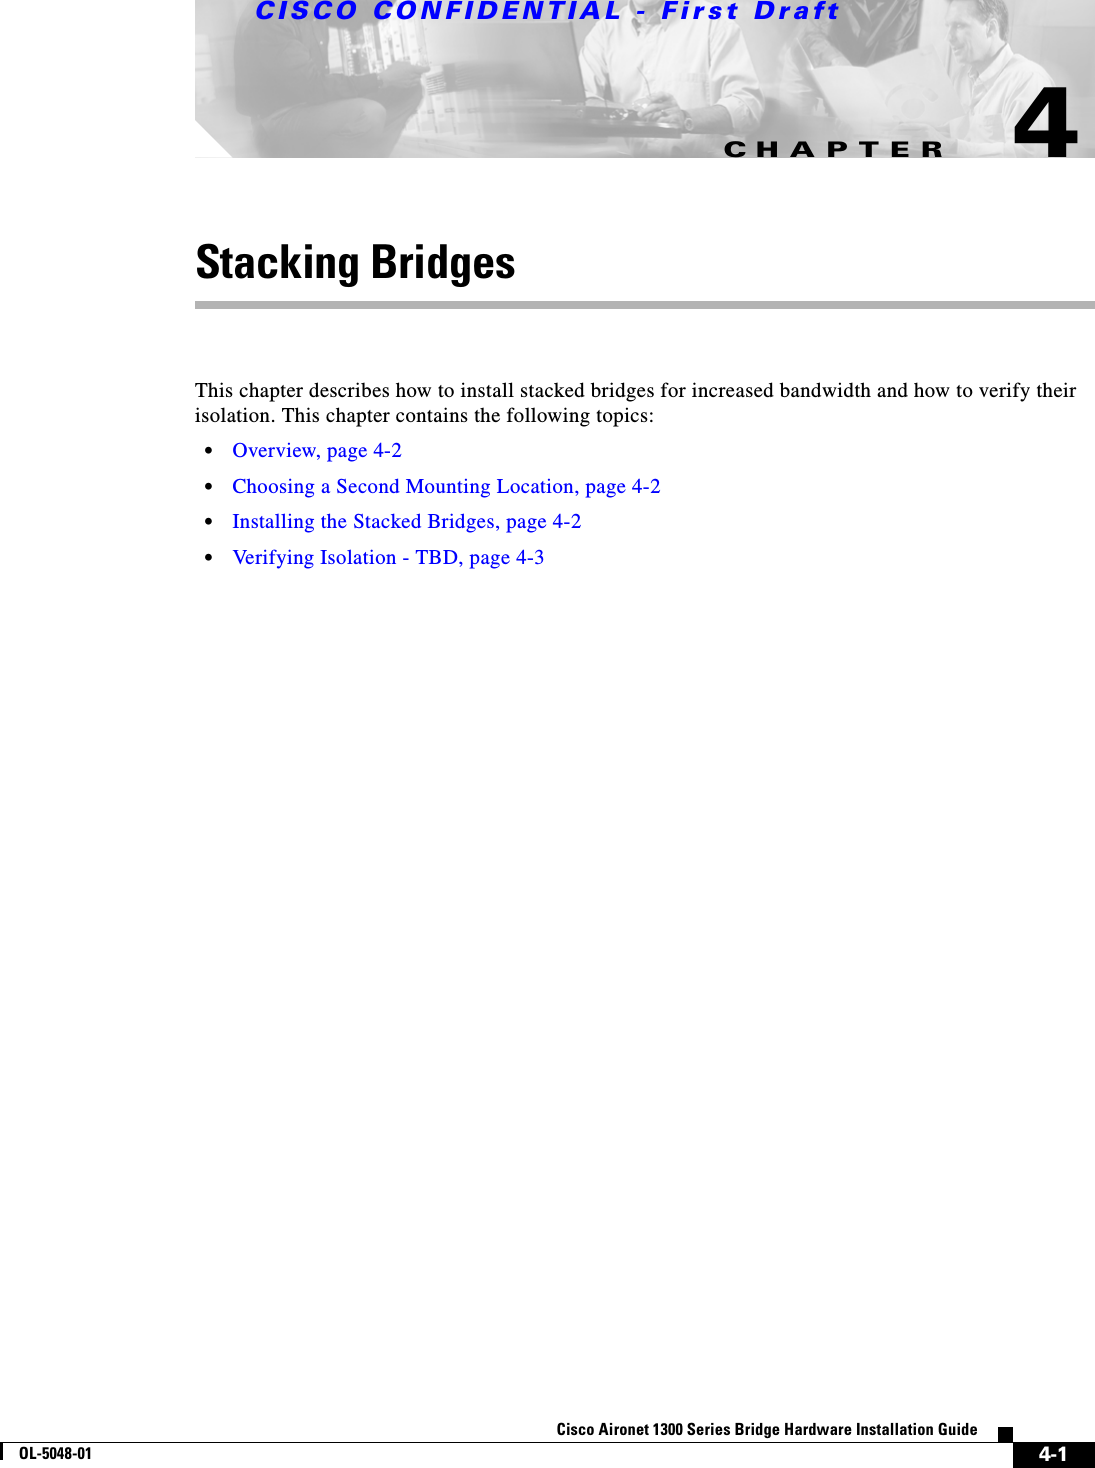 CHAPTERCISCO CONFIDENTIAL - First Draft4-1Cisco Aironet 1300 Series Bridge Hardware Installation GuideOL-5048-014Stacking BridgesThis chapter describes how to install stacked bridges for increased bandwidth and how to verify their isolation. This chapter contains the following topics:•Overview, page 4-2•Choosing a Second Mounting Location, page 4-2•Installing the Stacked Bridges, page 4-2•Verifying Isolation - TBD, page 4-3